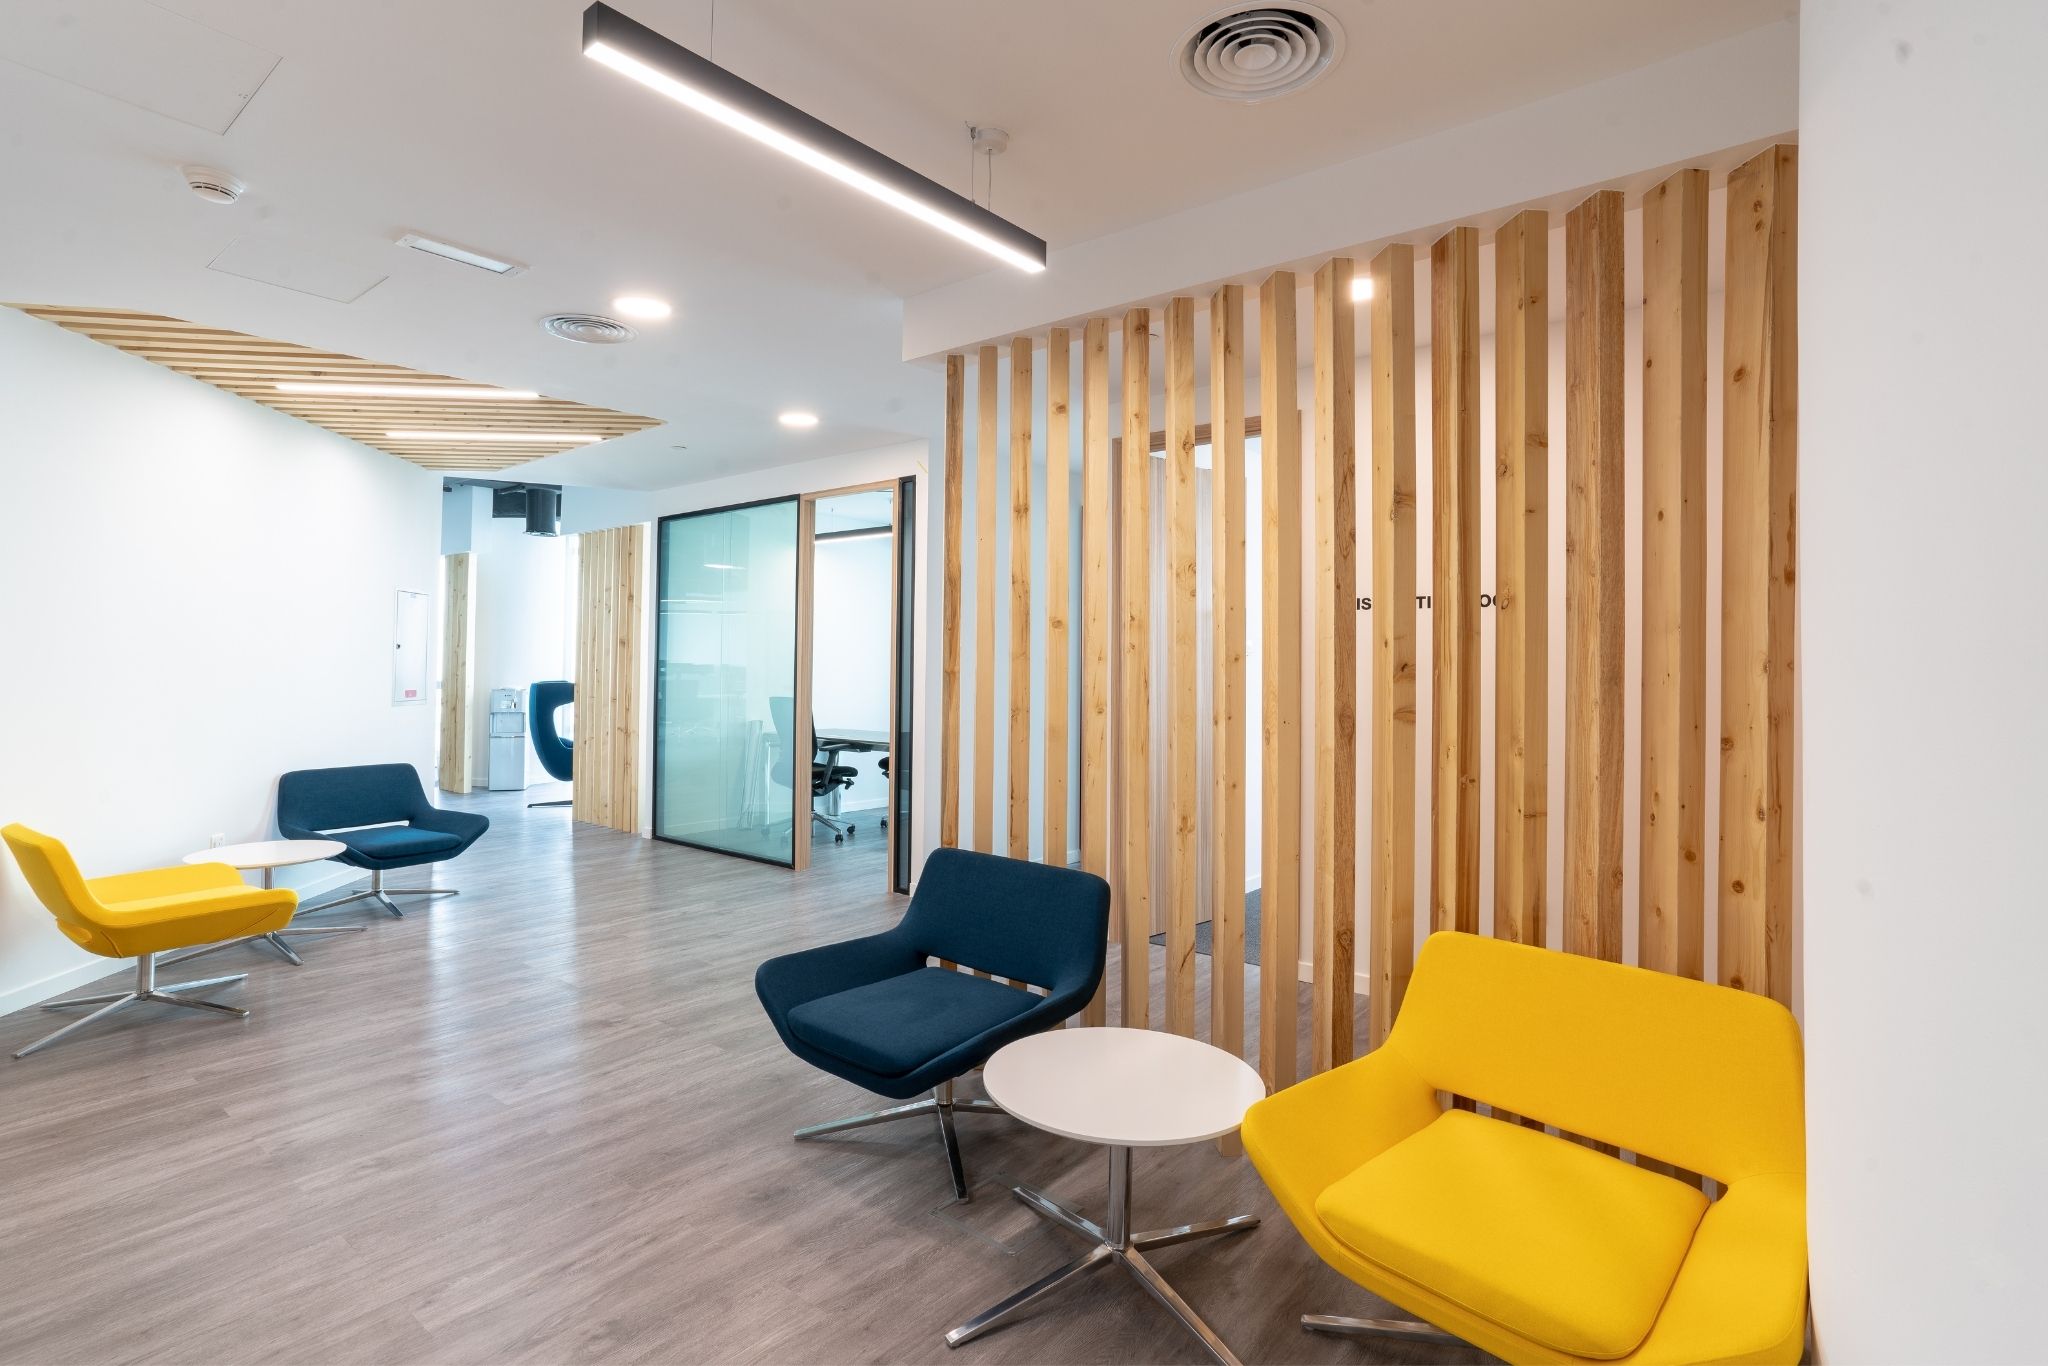 Renault regional office in Dubai design and build by Motif Interiors1